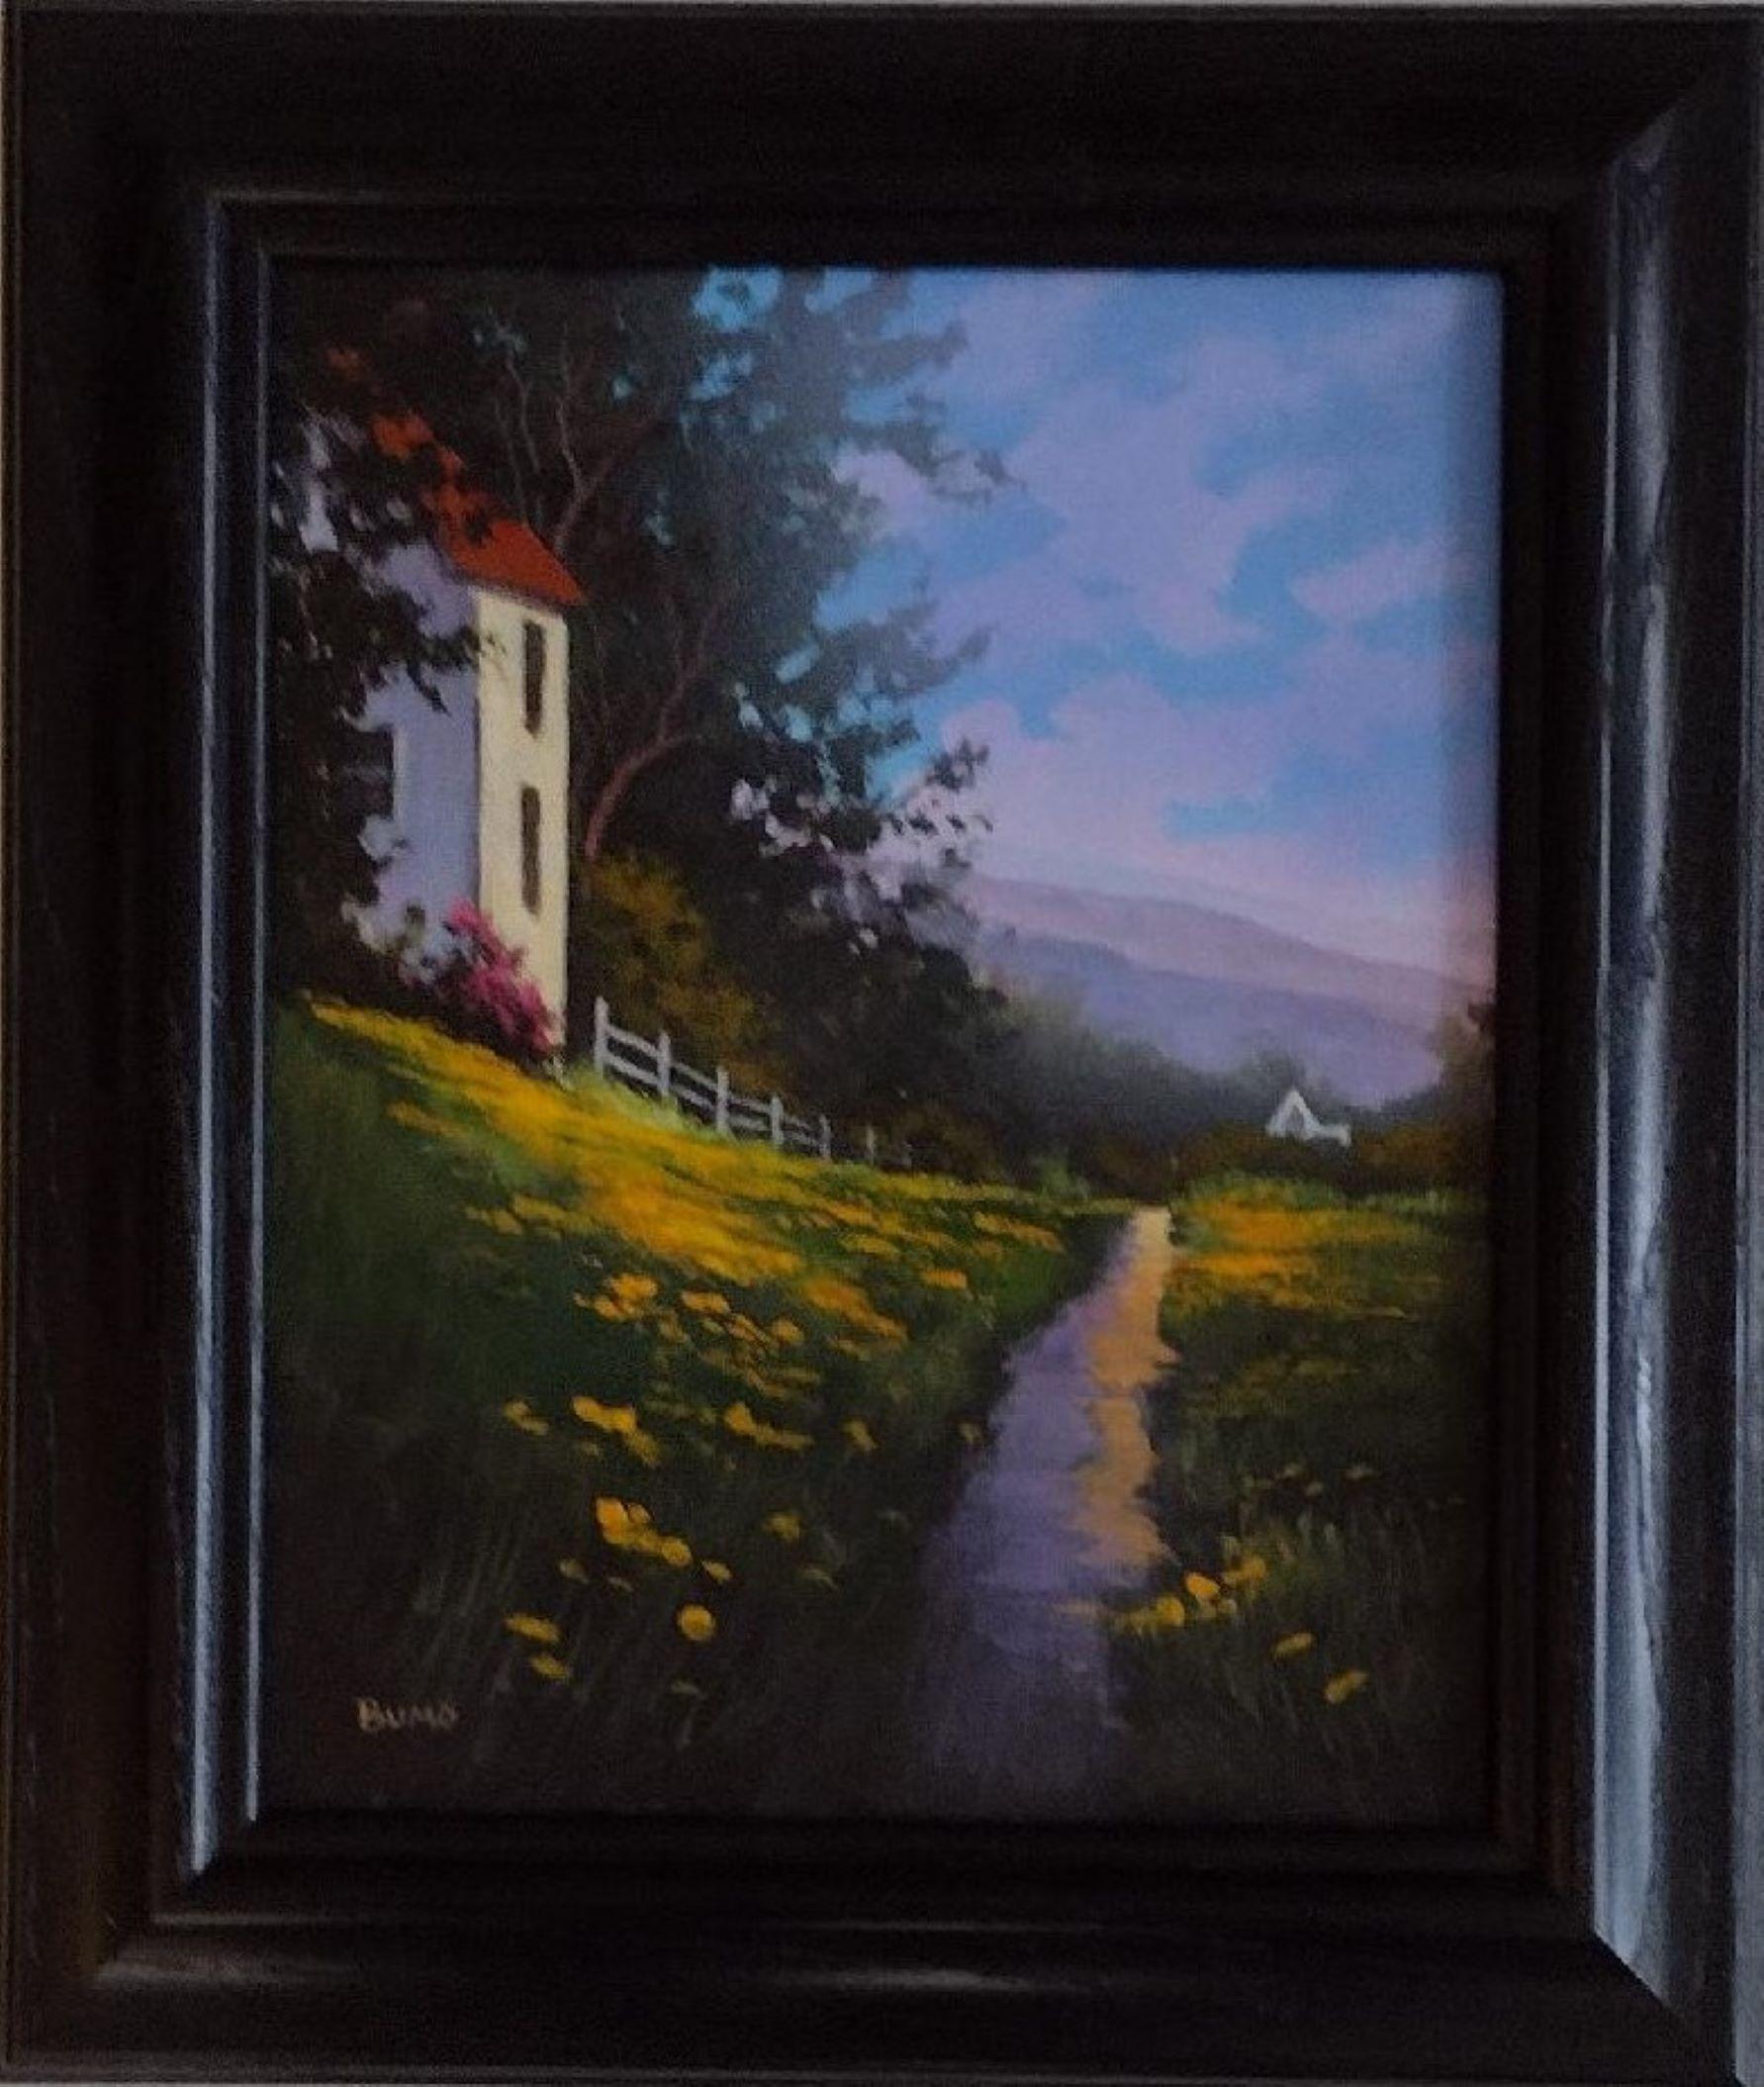 Douglas "Bumo" Johnpeer Landscape Painting - Front Path - Original acrylic on canvas landscape with house in the country